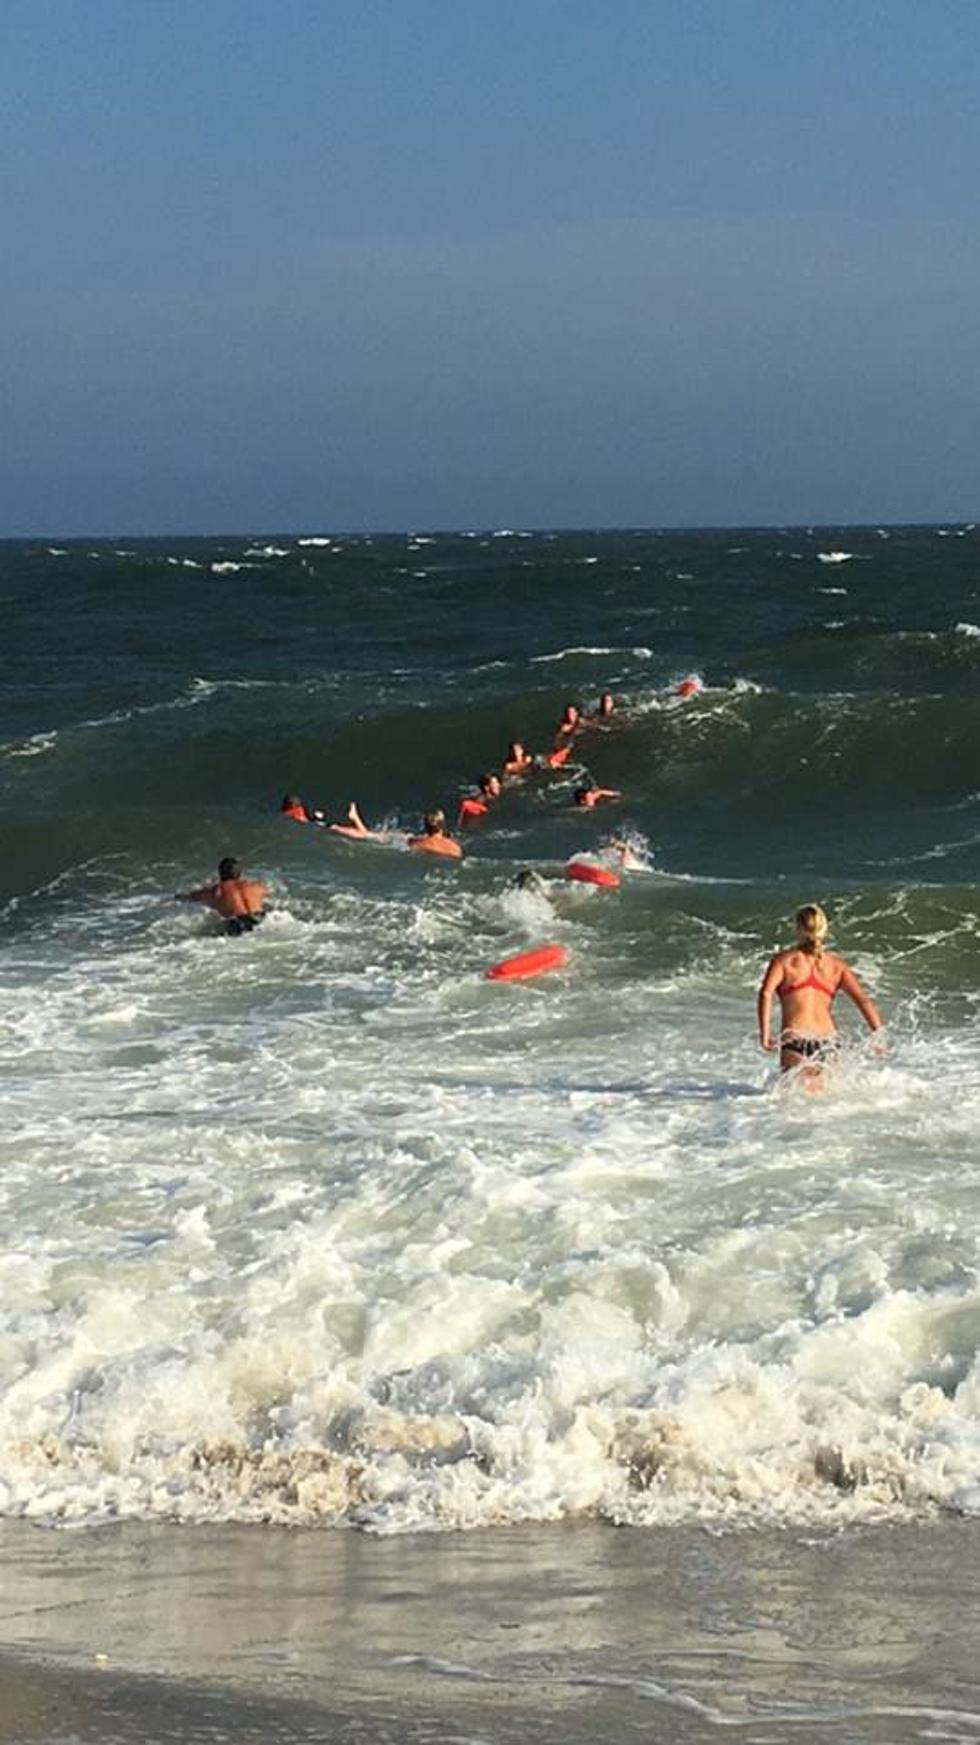 Cape May Lifeguards Form a “Human Chain” to Rescue Man From Rip Current [VIDEO]